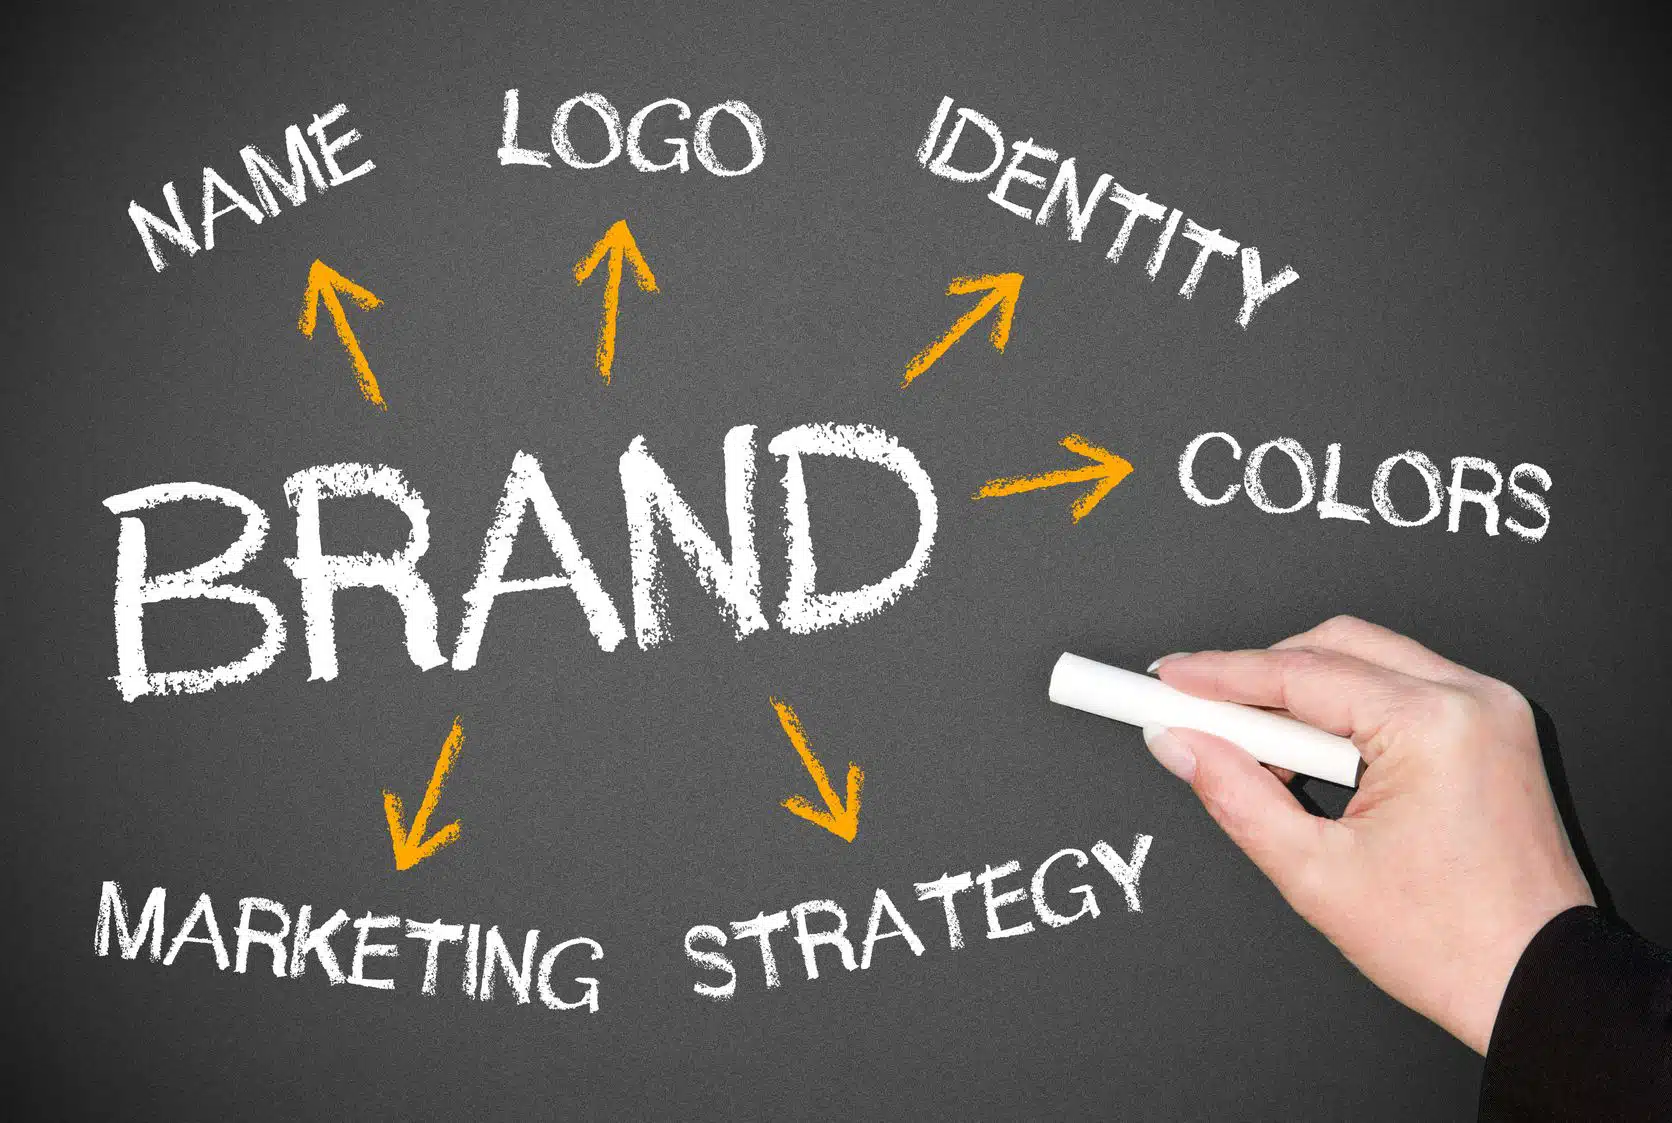 The 4 Keys to Successful Branding